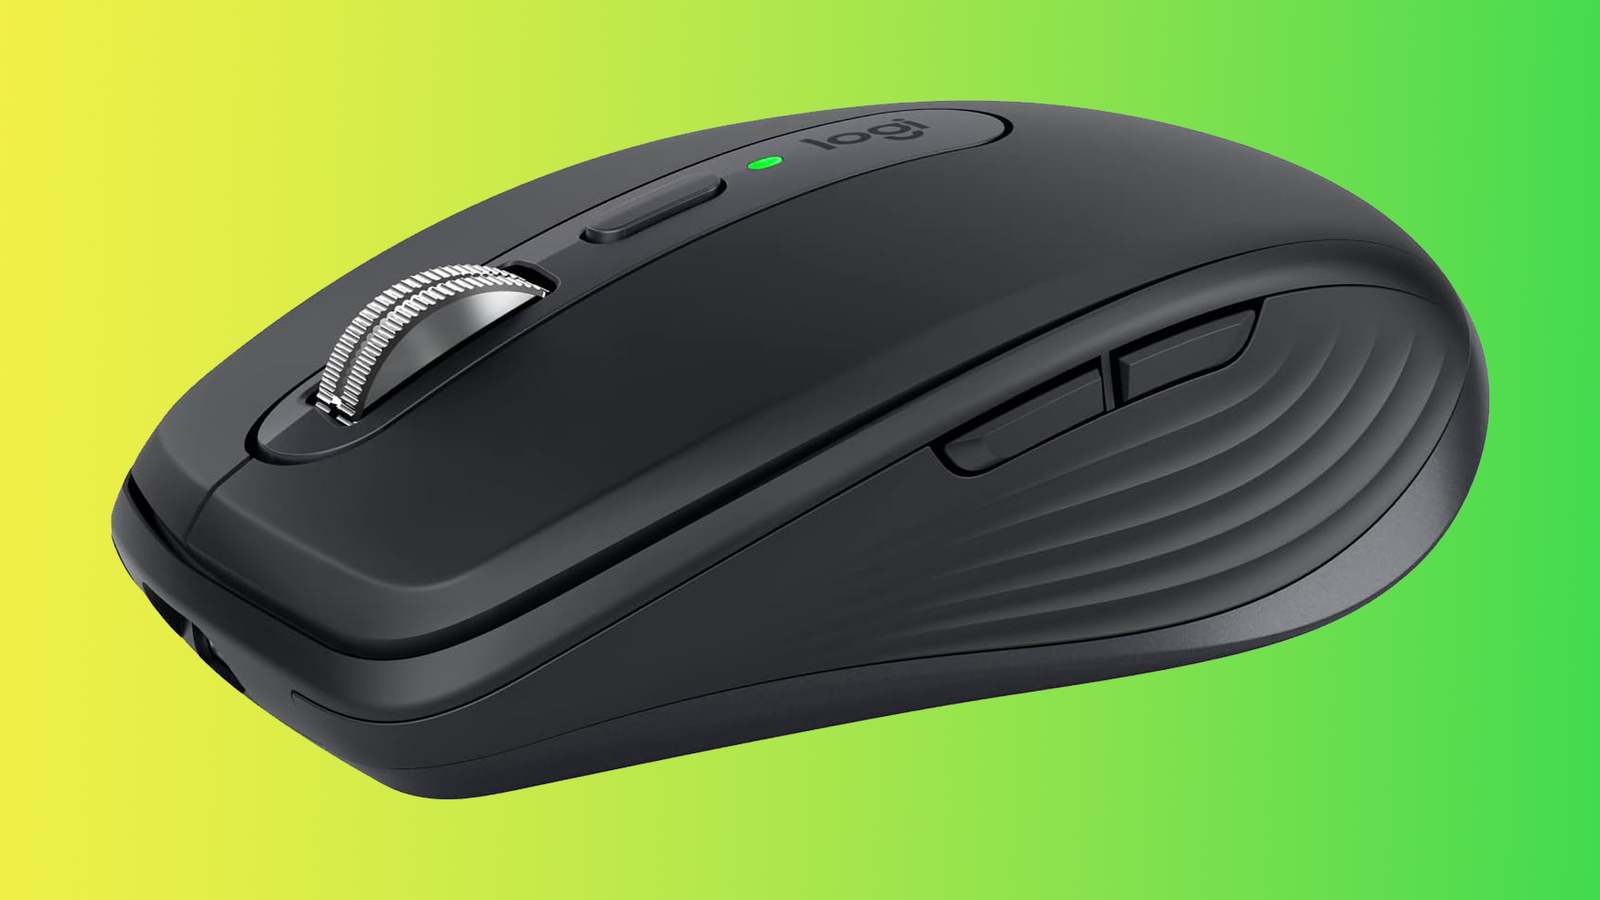 The brand new Logitech MX Anywhere 3S can be yours for £68 from